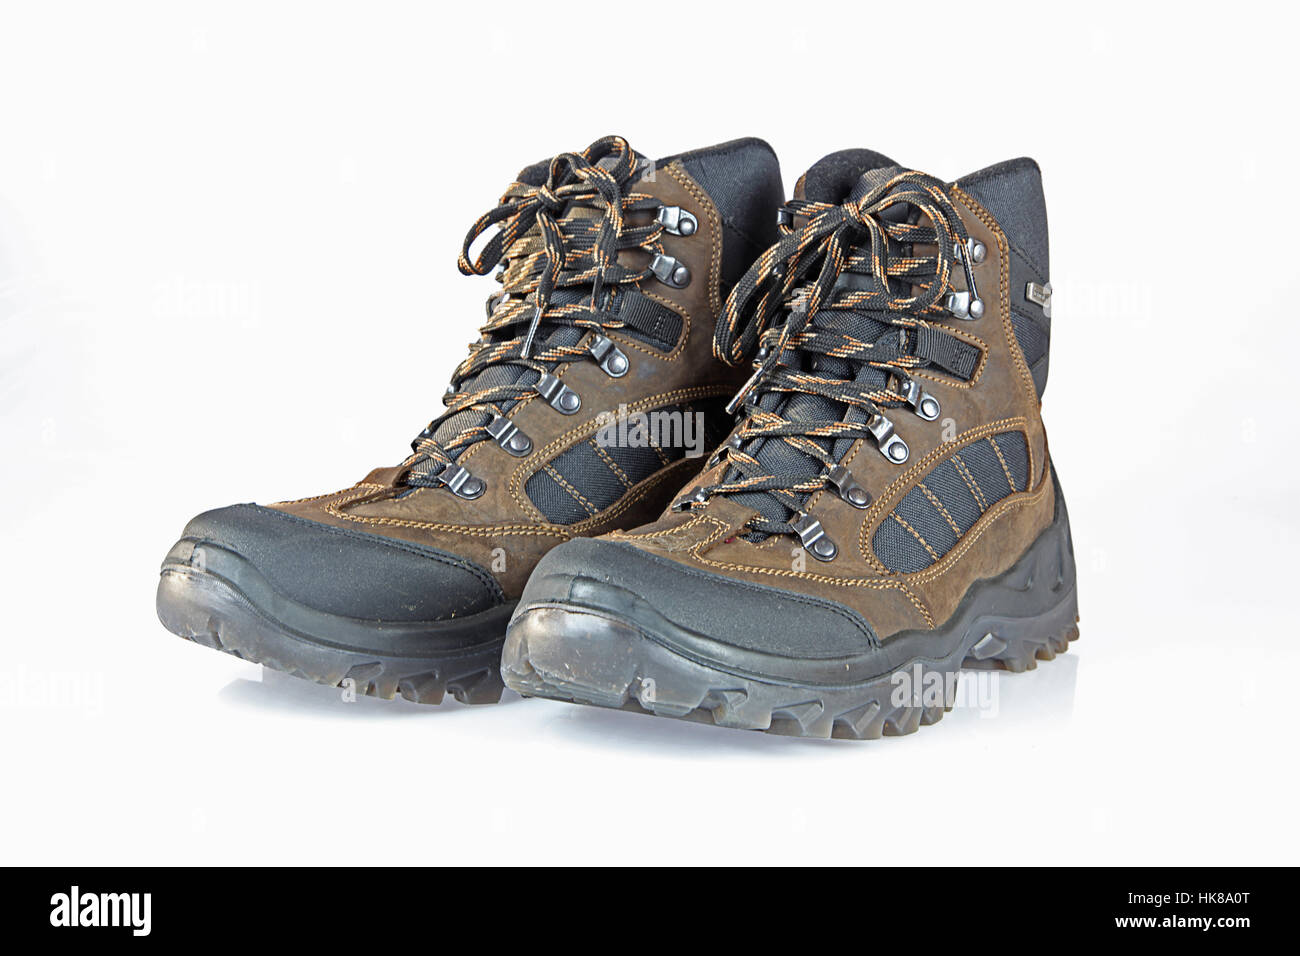 hike, go hiking, ramble, shoes, leather, boots for tramping, migrate, motion, Stock Photo